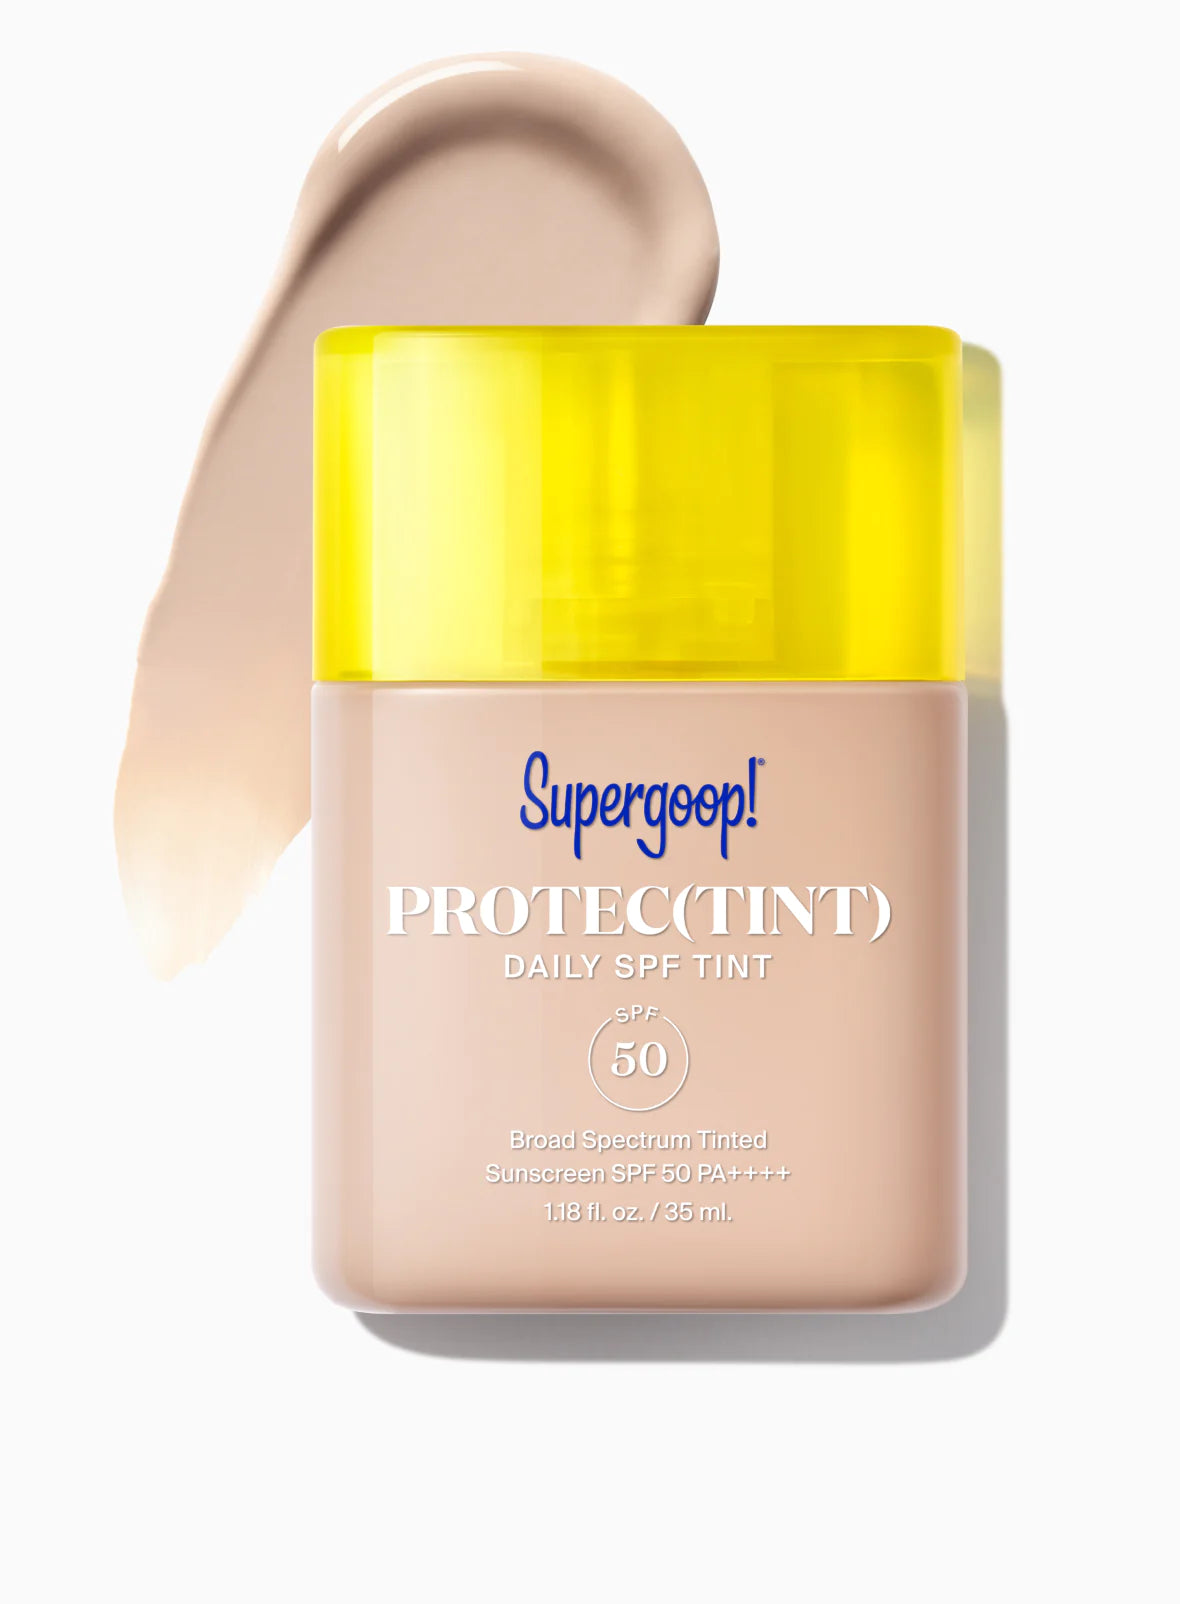 Protec(tint) daily SPF tint SPF 50 sunscreen skin tint with hyaluronic acid and ectoin Supergoop!